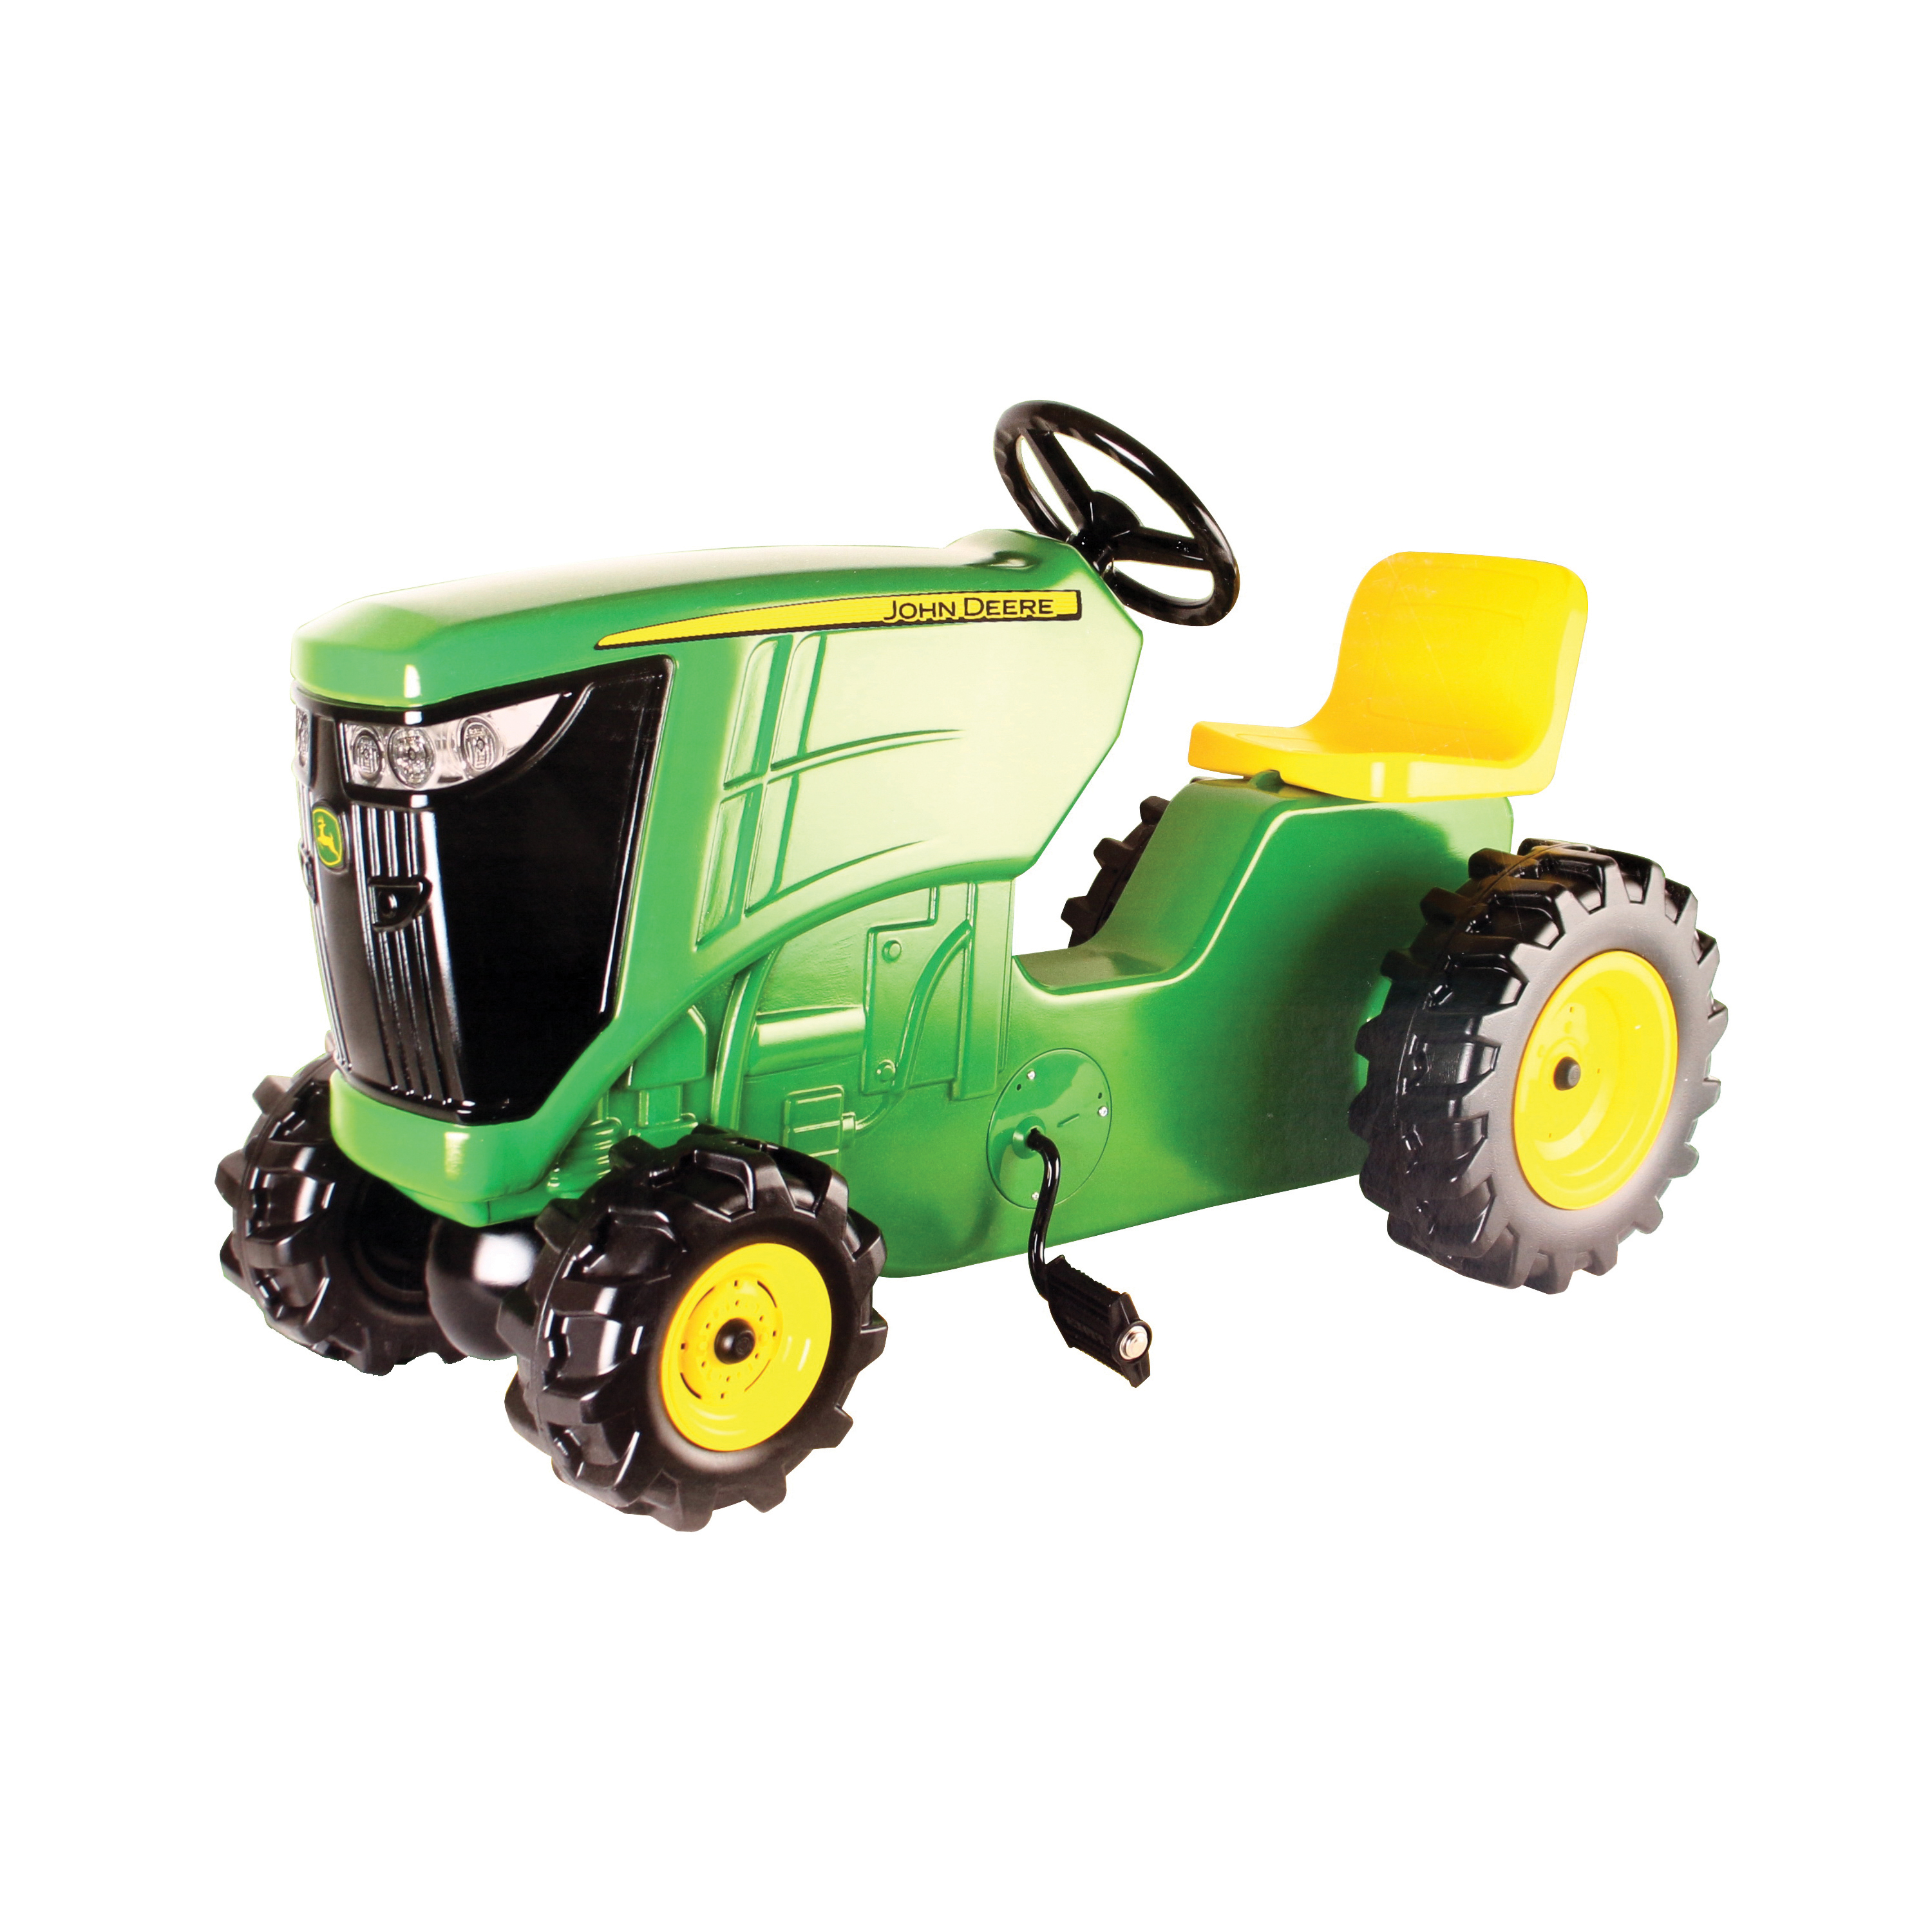 46394 Pedal Tractor, Plastic, Green